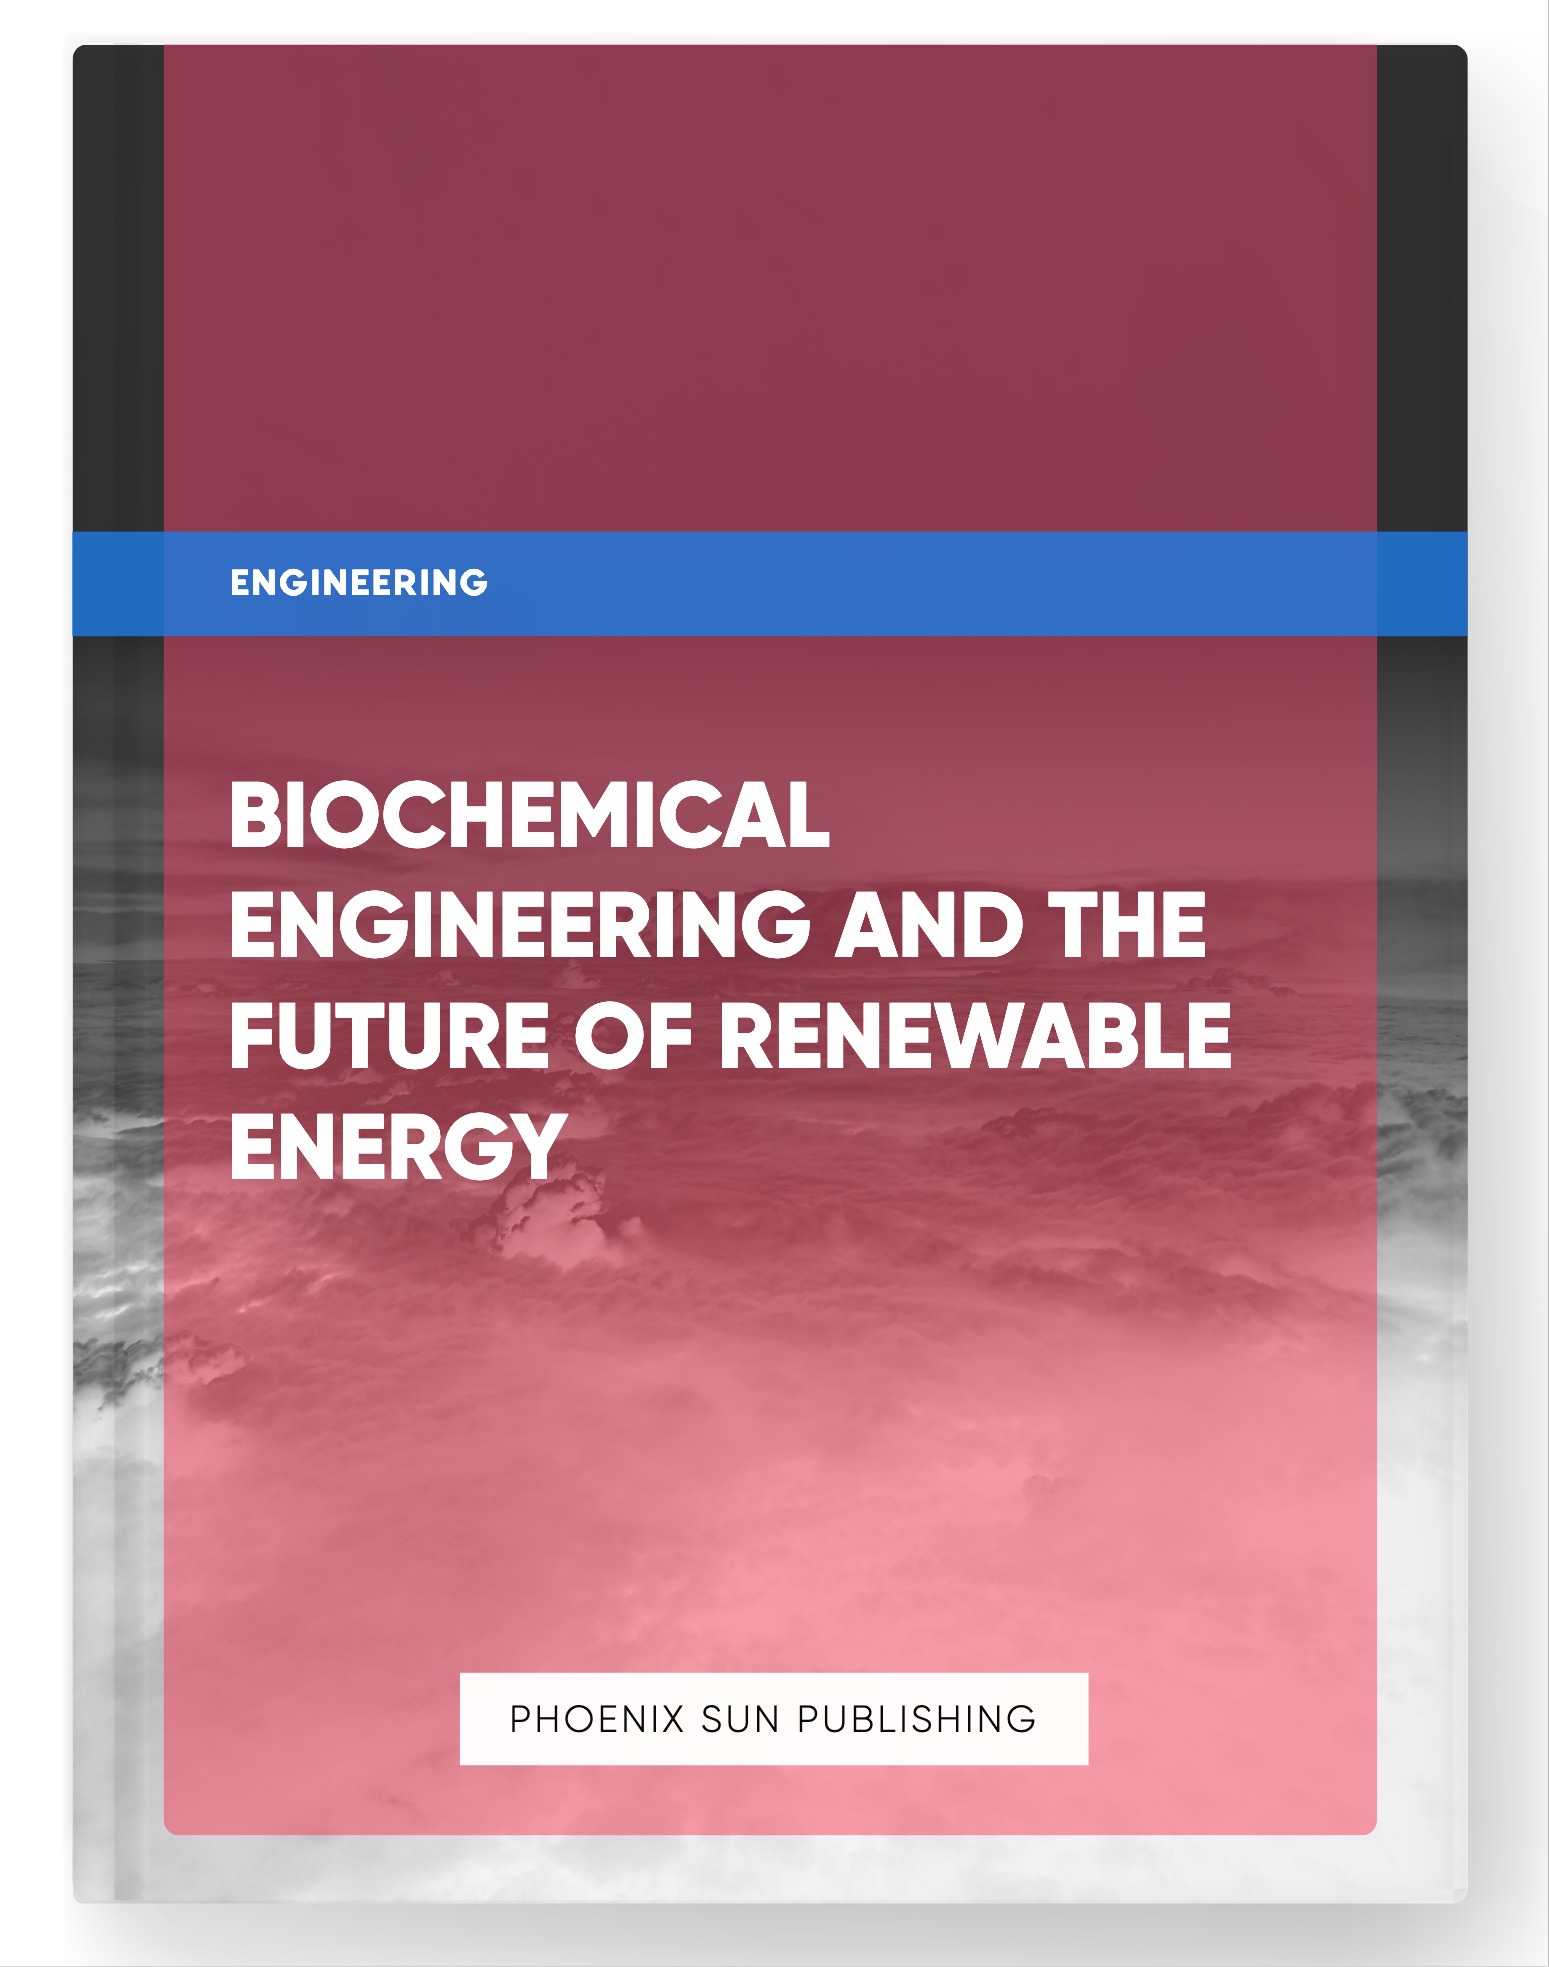 Biochemical Engineering and the Future of Renewable Energy